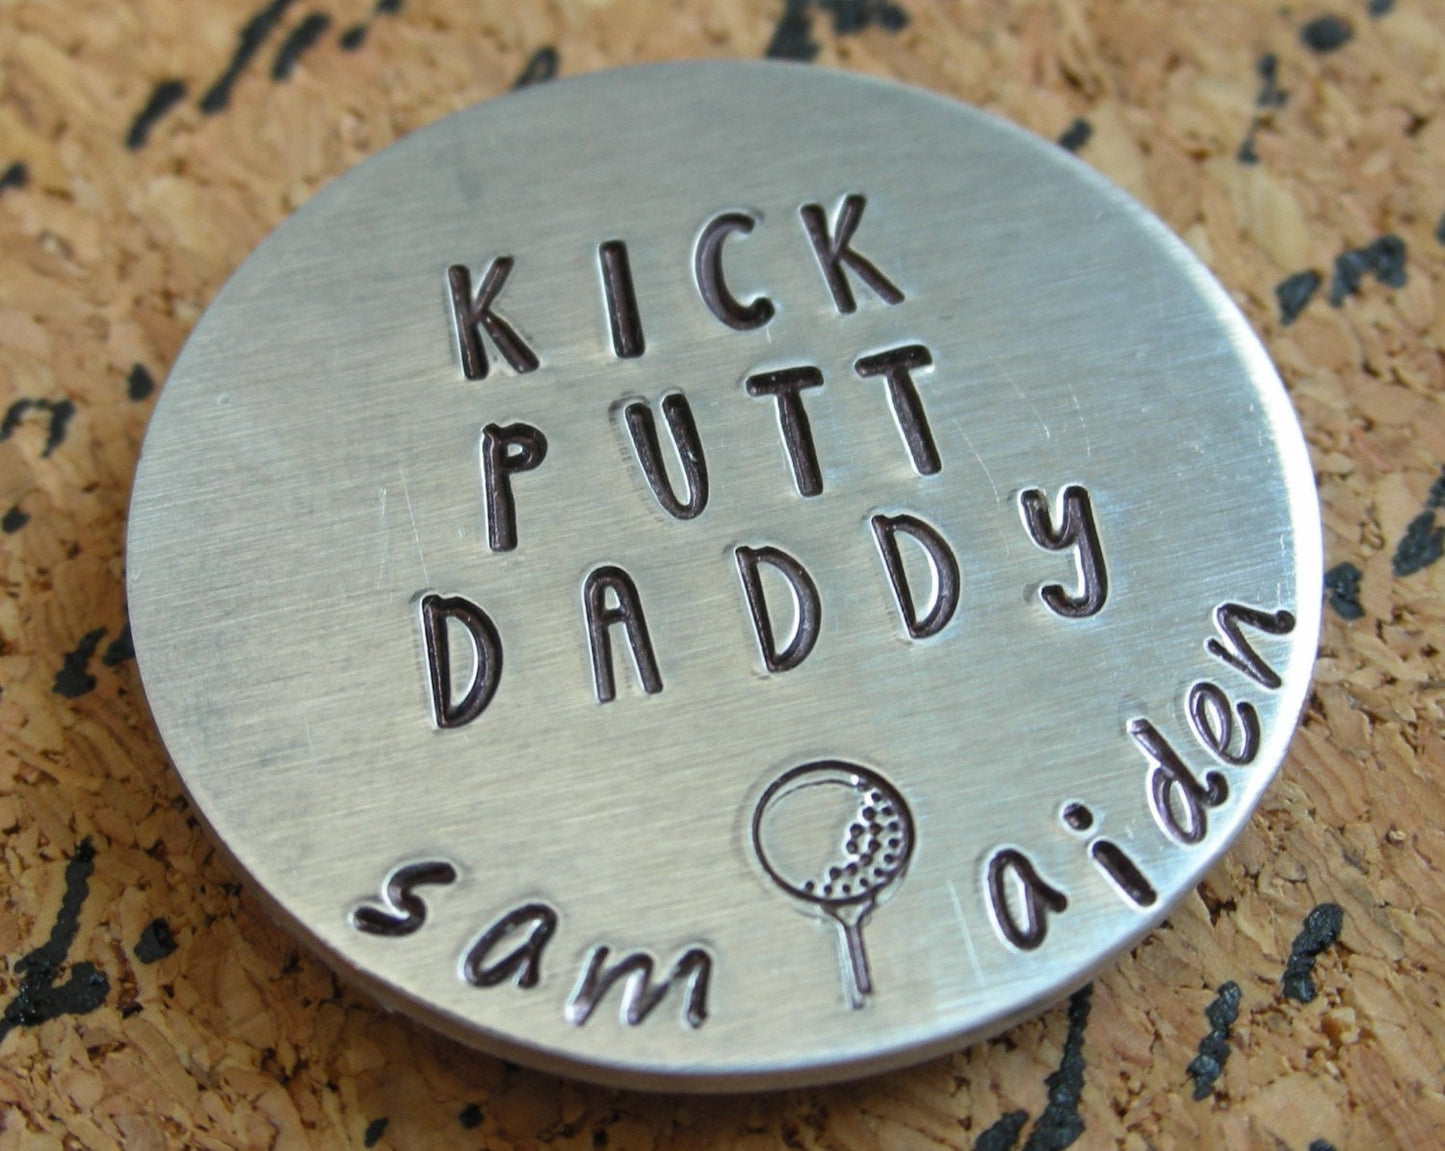 Personalized Golf Ball Marker-Magnetic Golf Ball Marker-Hand Stamped Golf Ball Marker with Hat Clip-Kick Putt Dad-Gift for Golfer